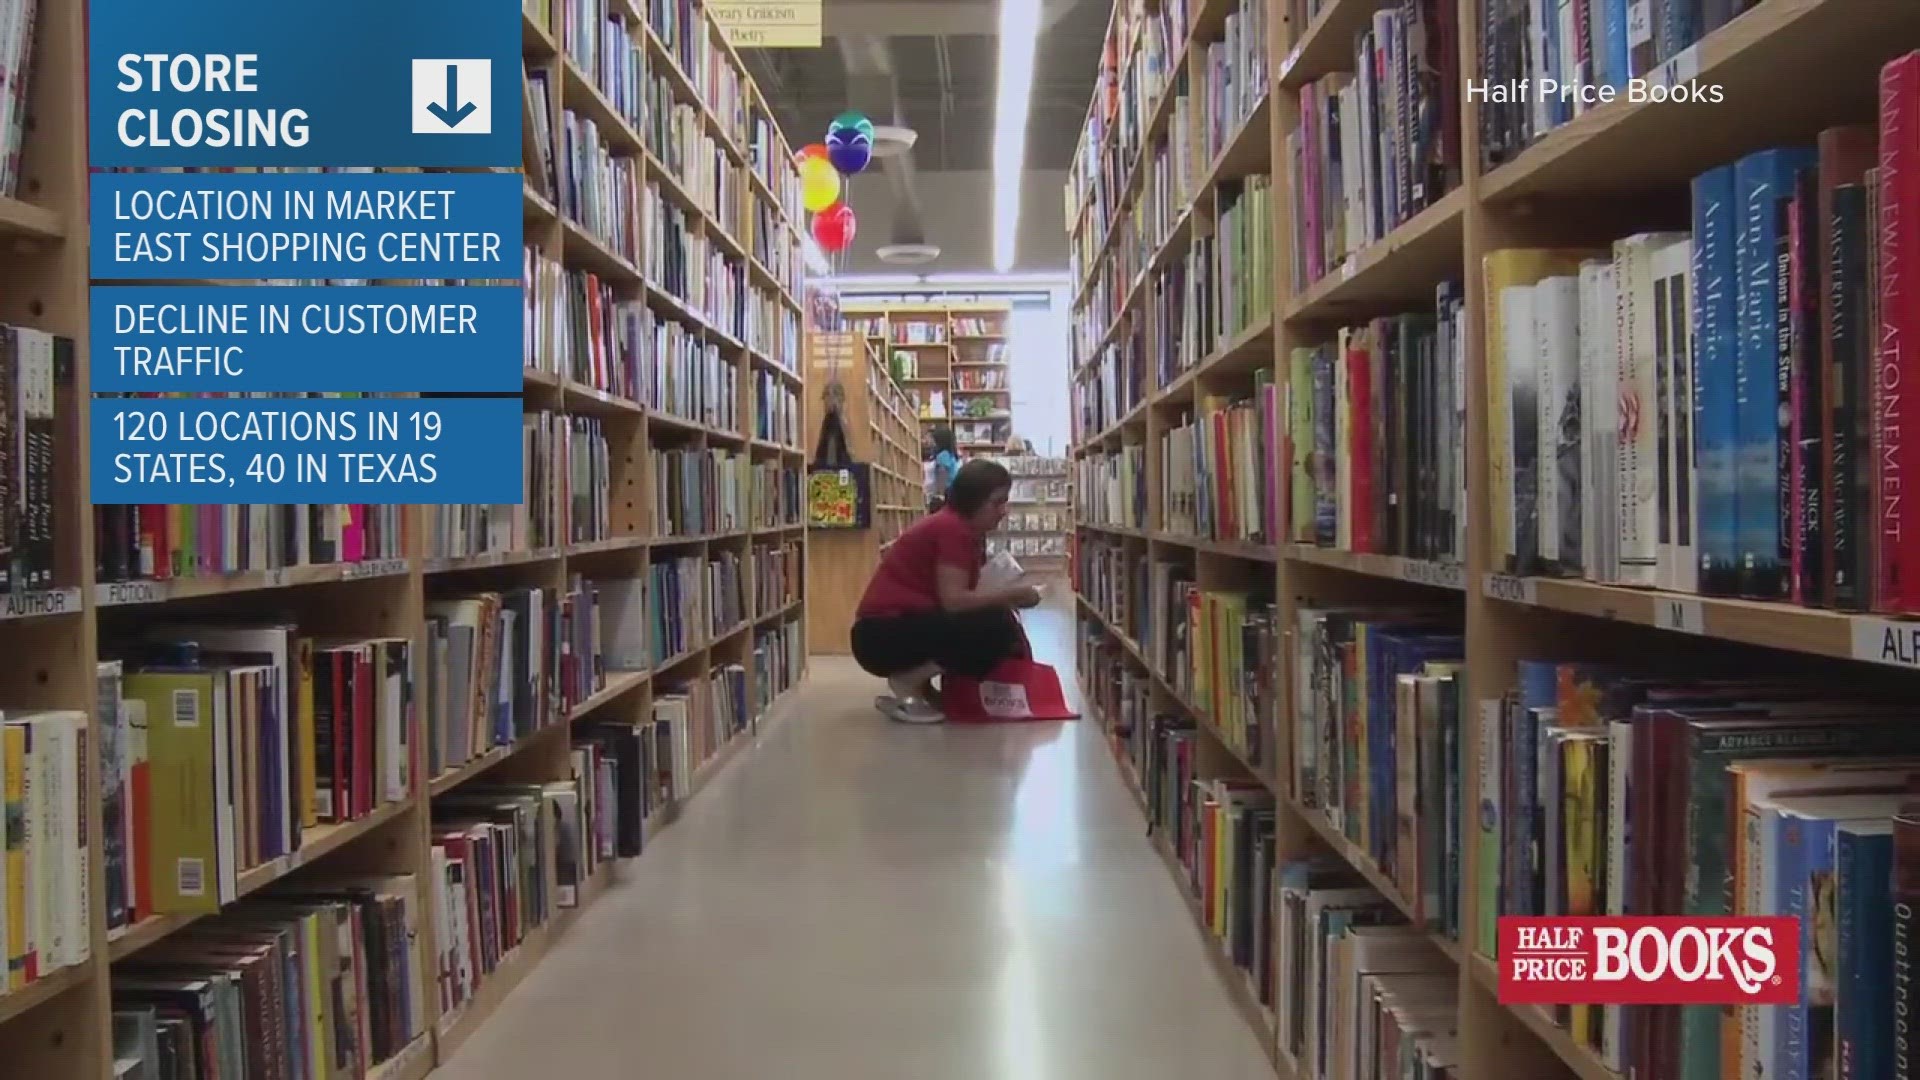 Half Price Books has about 120 locations in 19 states, including about 40 in Texas, according to their website.